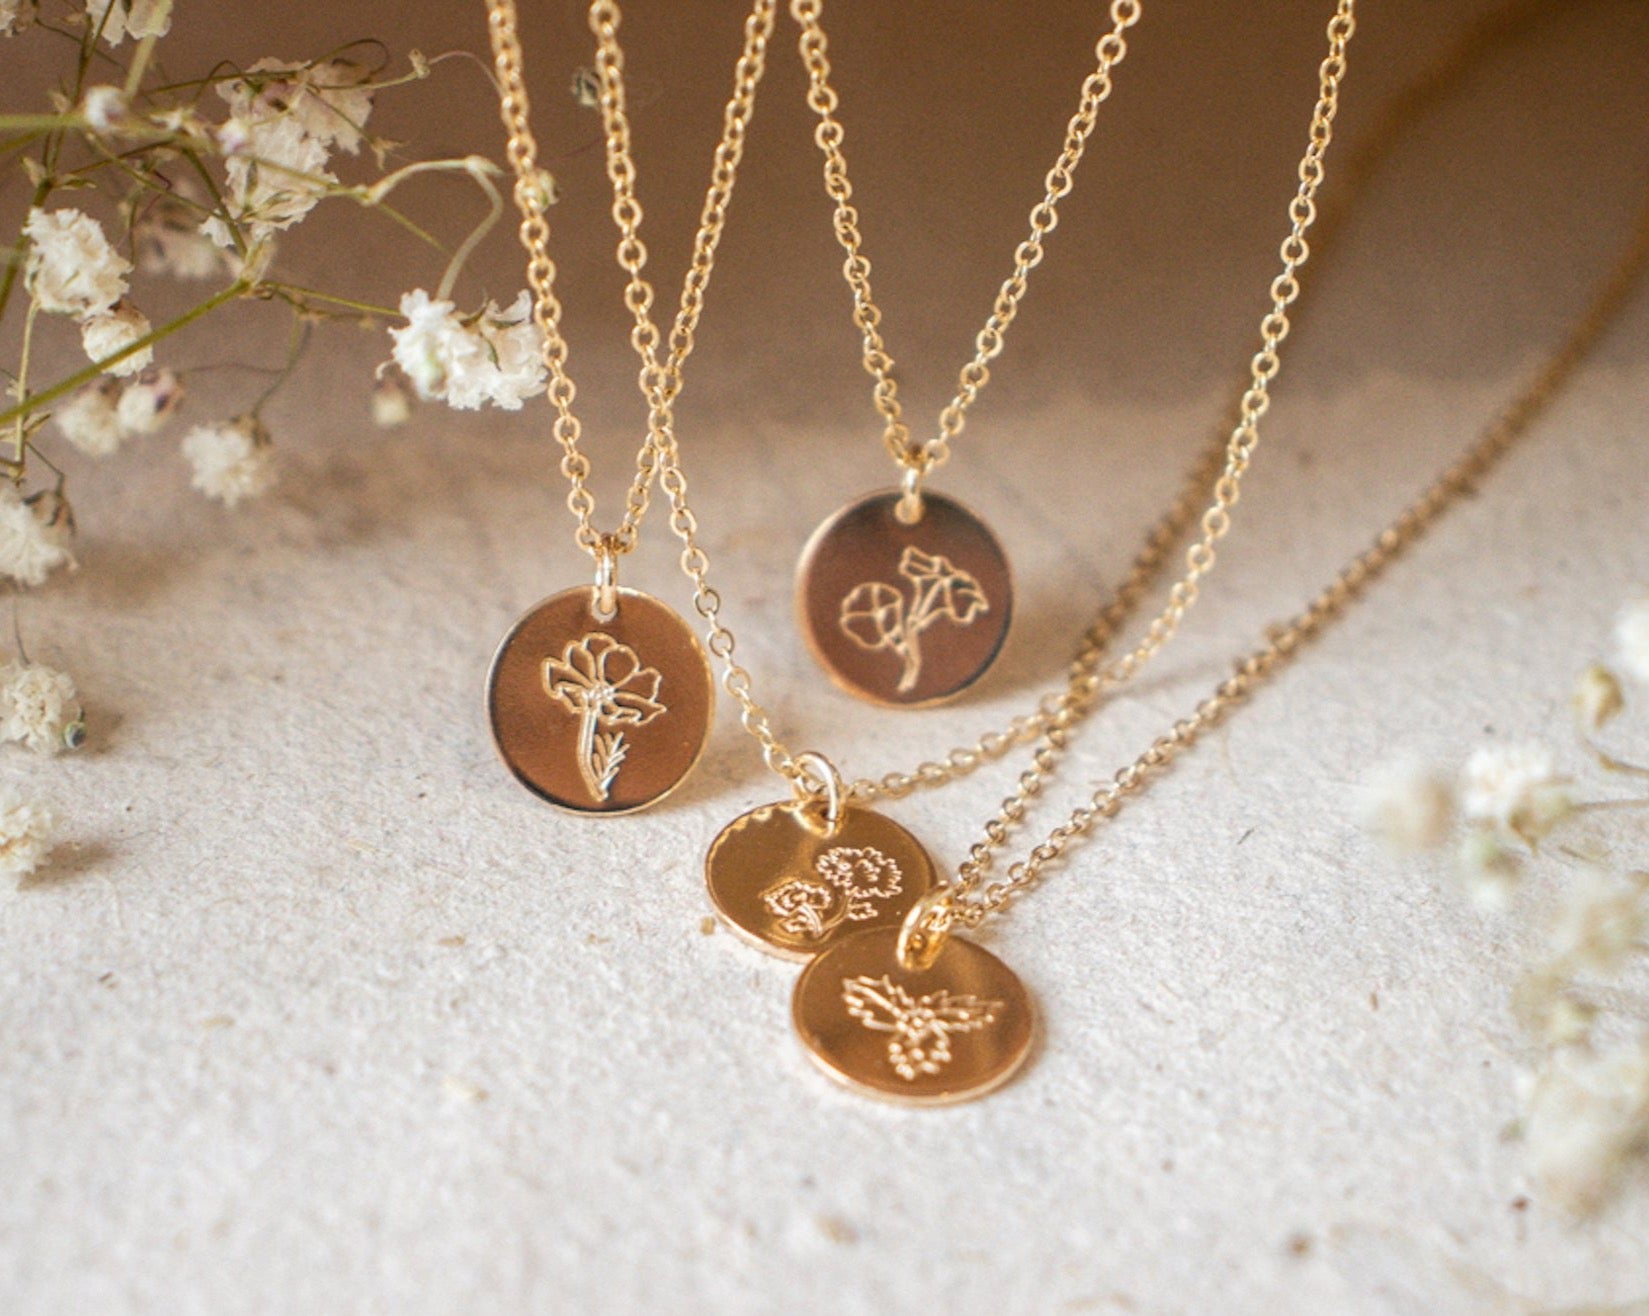 Gold Plated And Sterling Silver Birth Flower Necklace By Hurleyburley |  notonthehighstreet.com